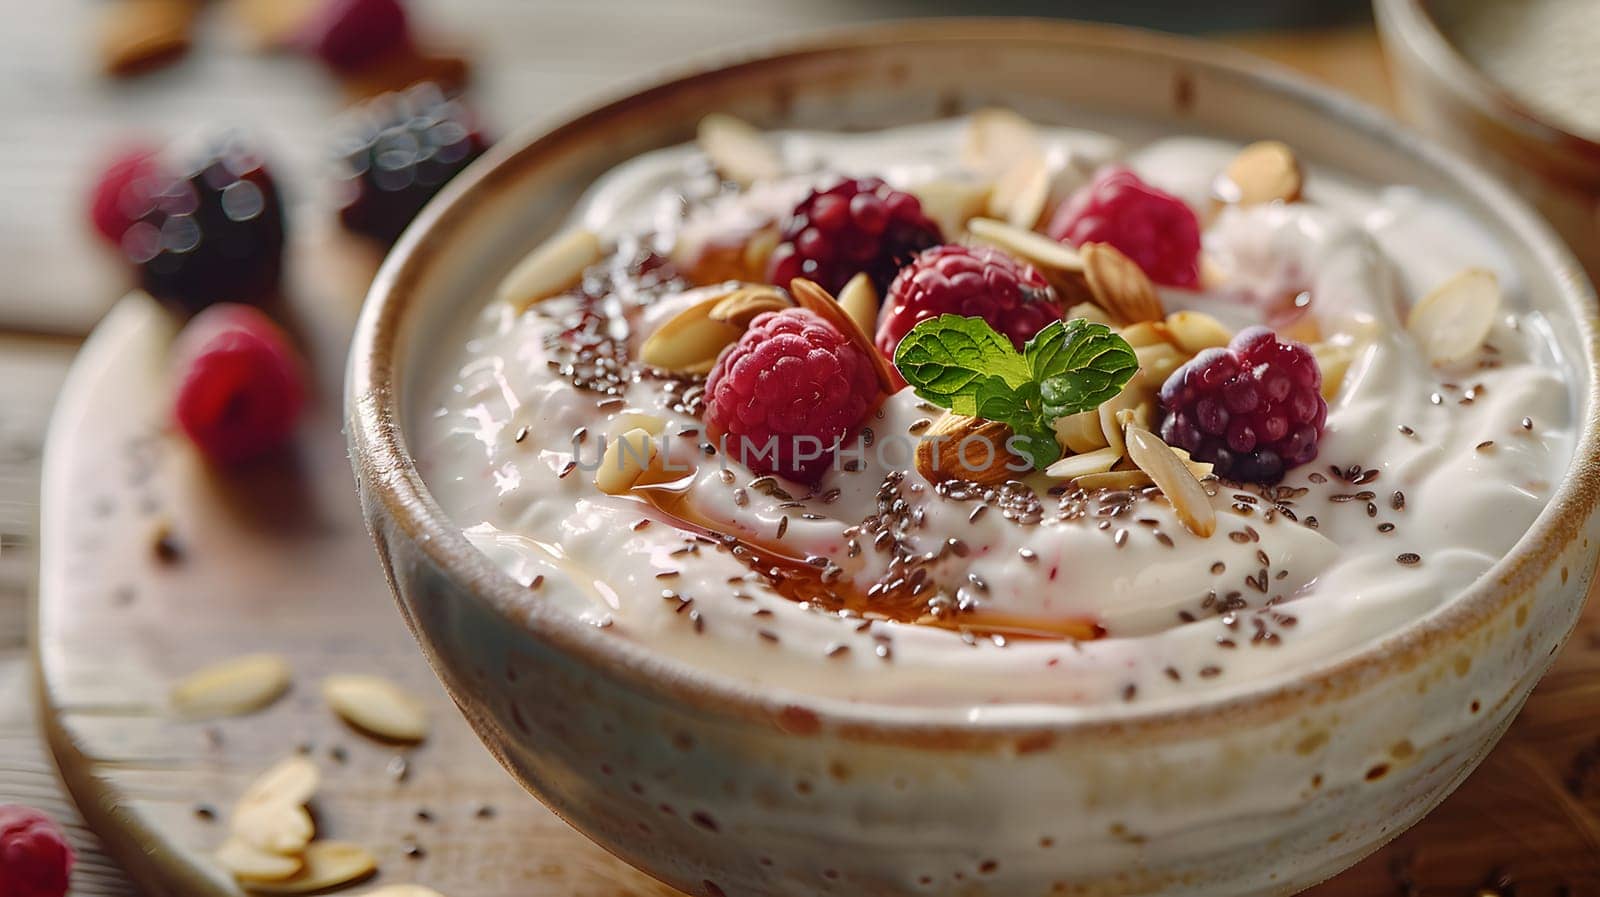 A delicious bowl of yogurt topped with raspberries and almonds by Nadtochiy